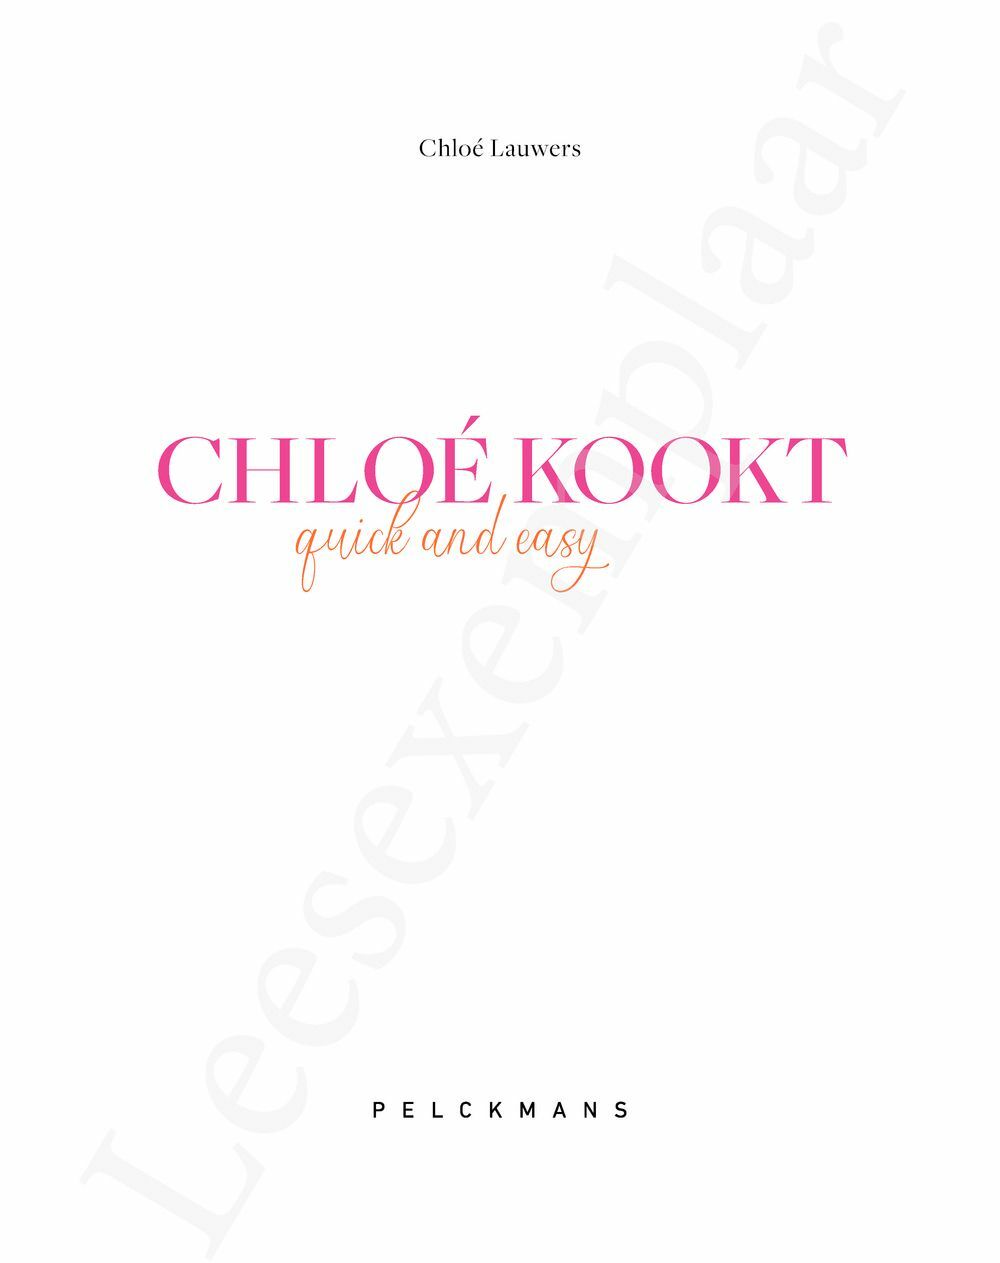 Preview: Chloé kookt - Quick & easy